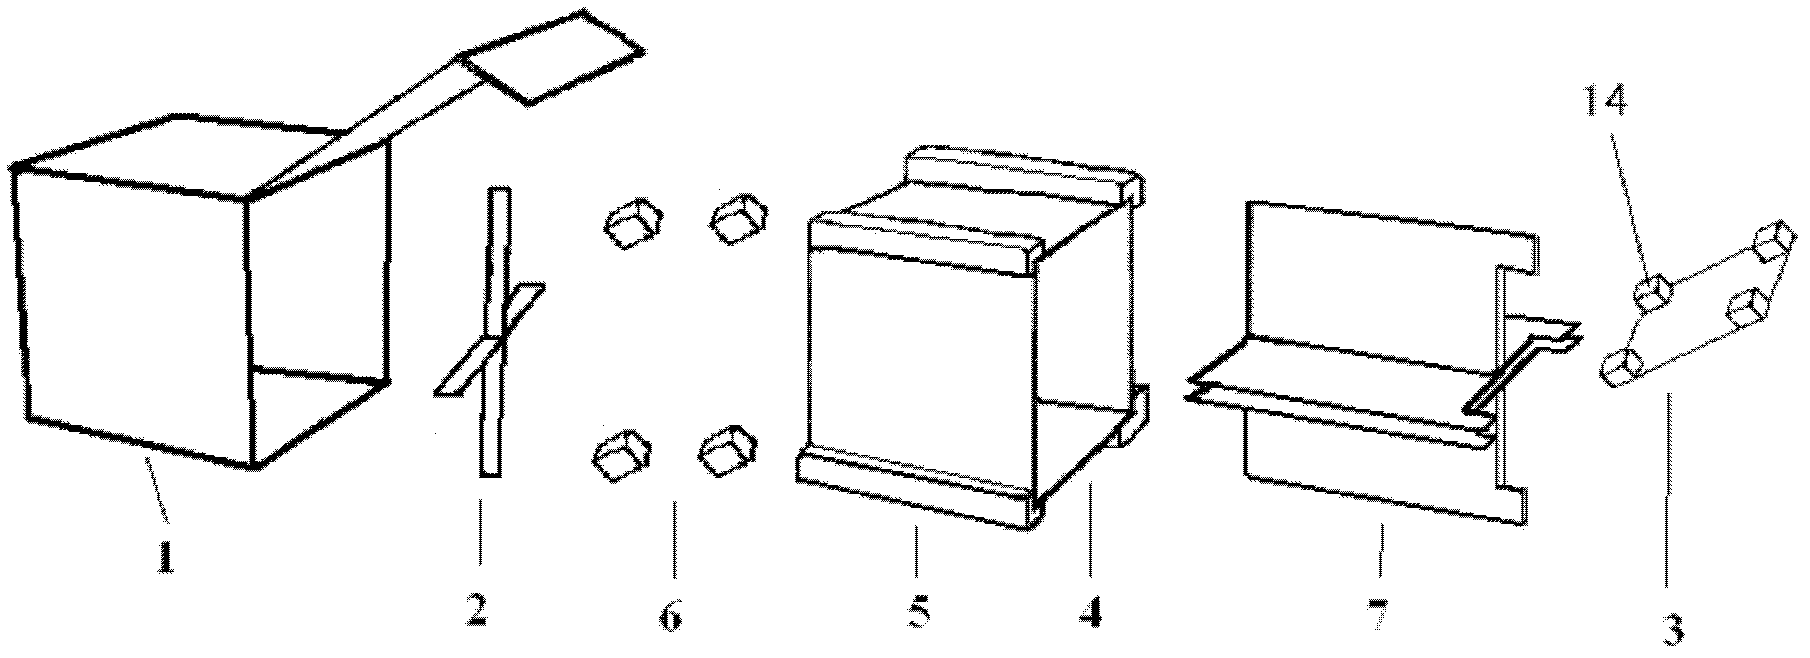 Packing cartoon for transporting multiple goods